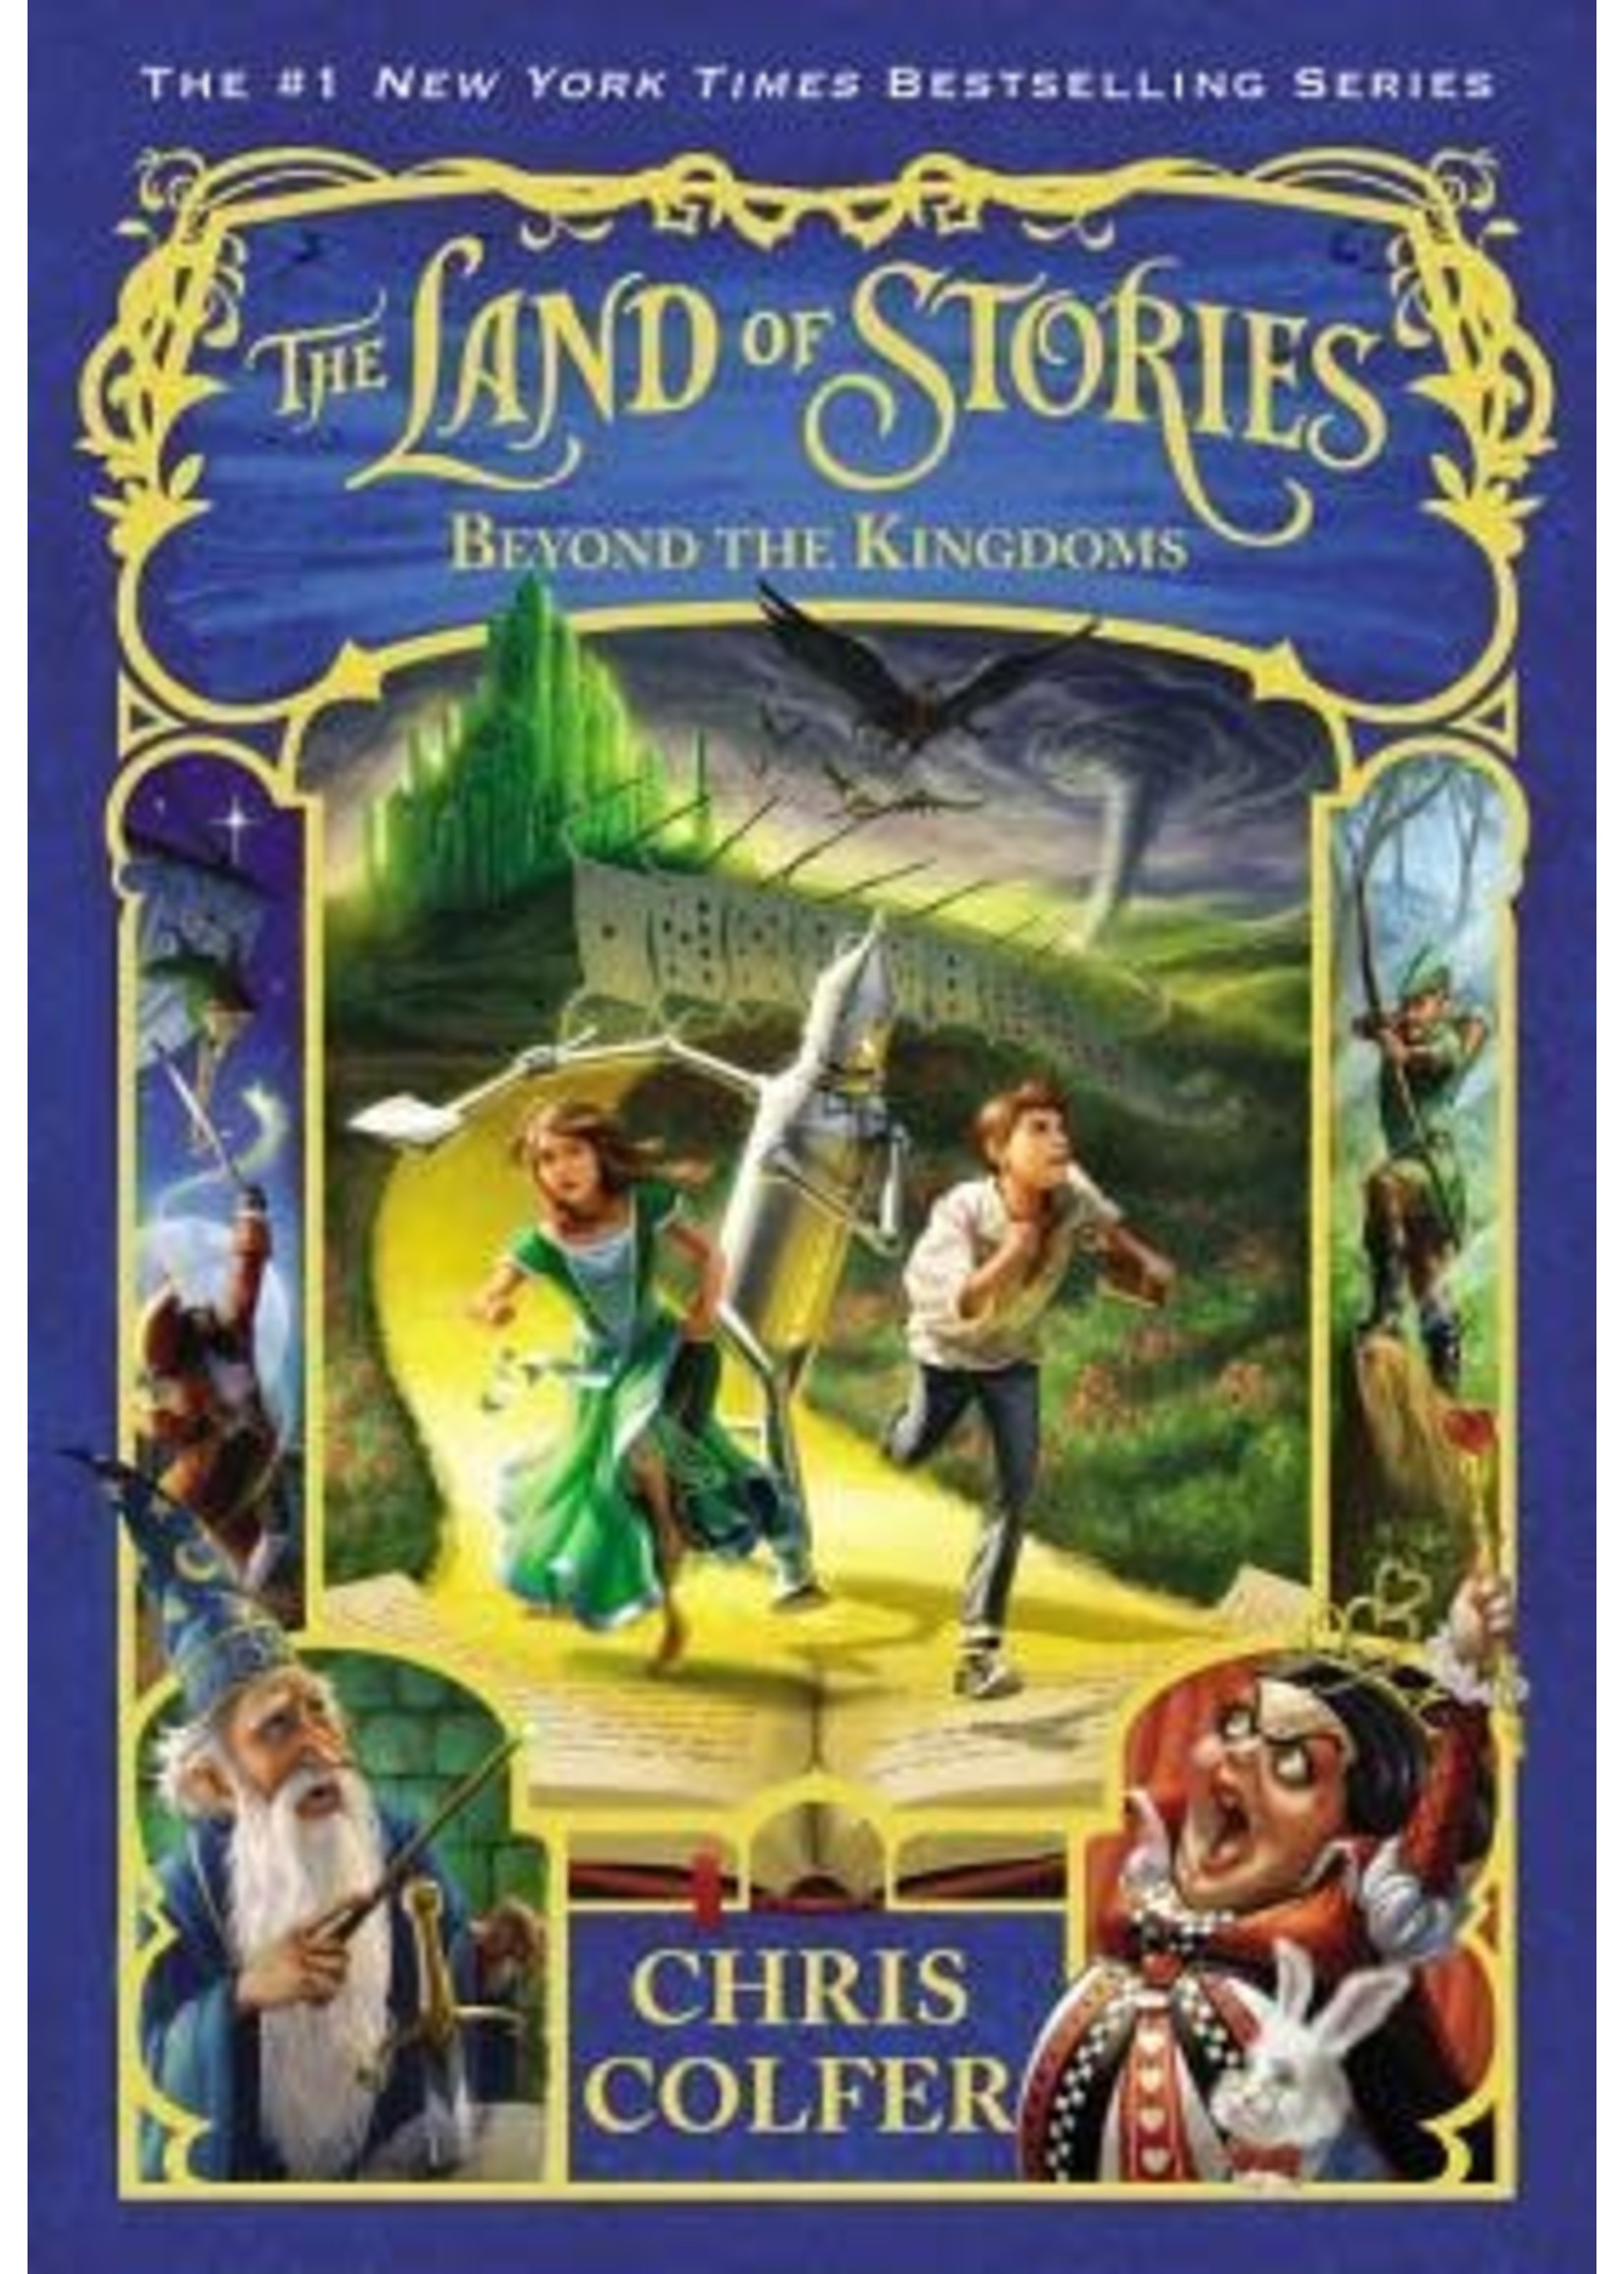 Beyond the Kingdoms (The Land of Stories #4) by Chris Colfer